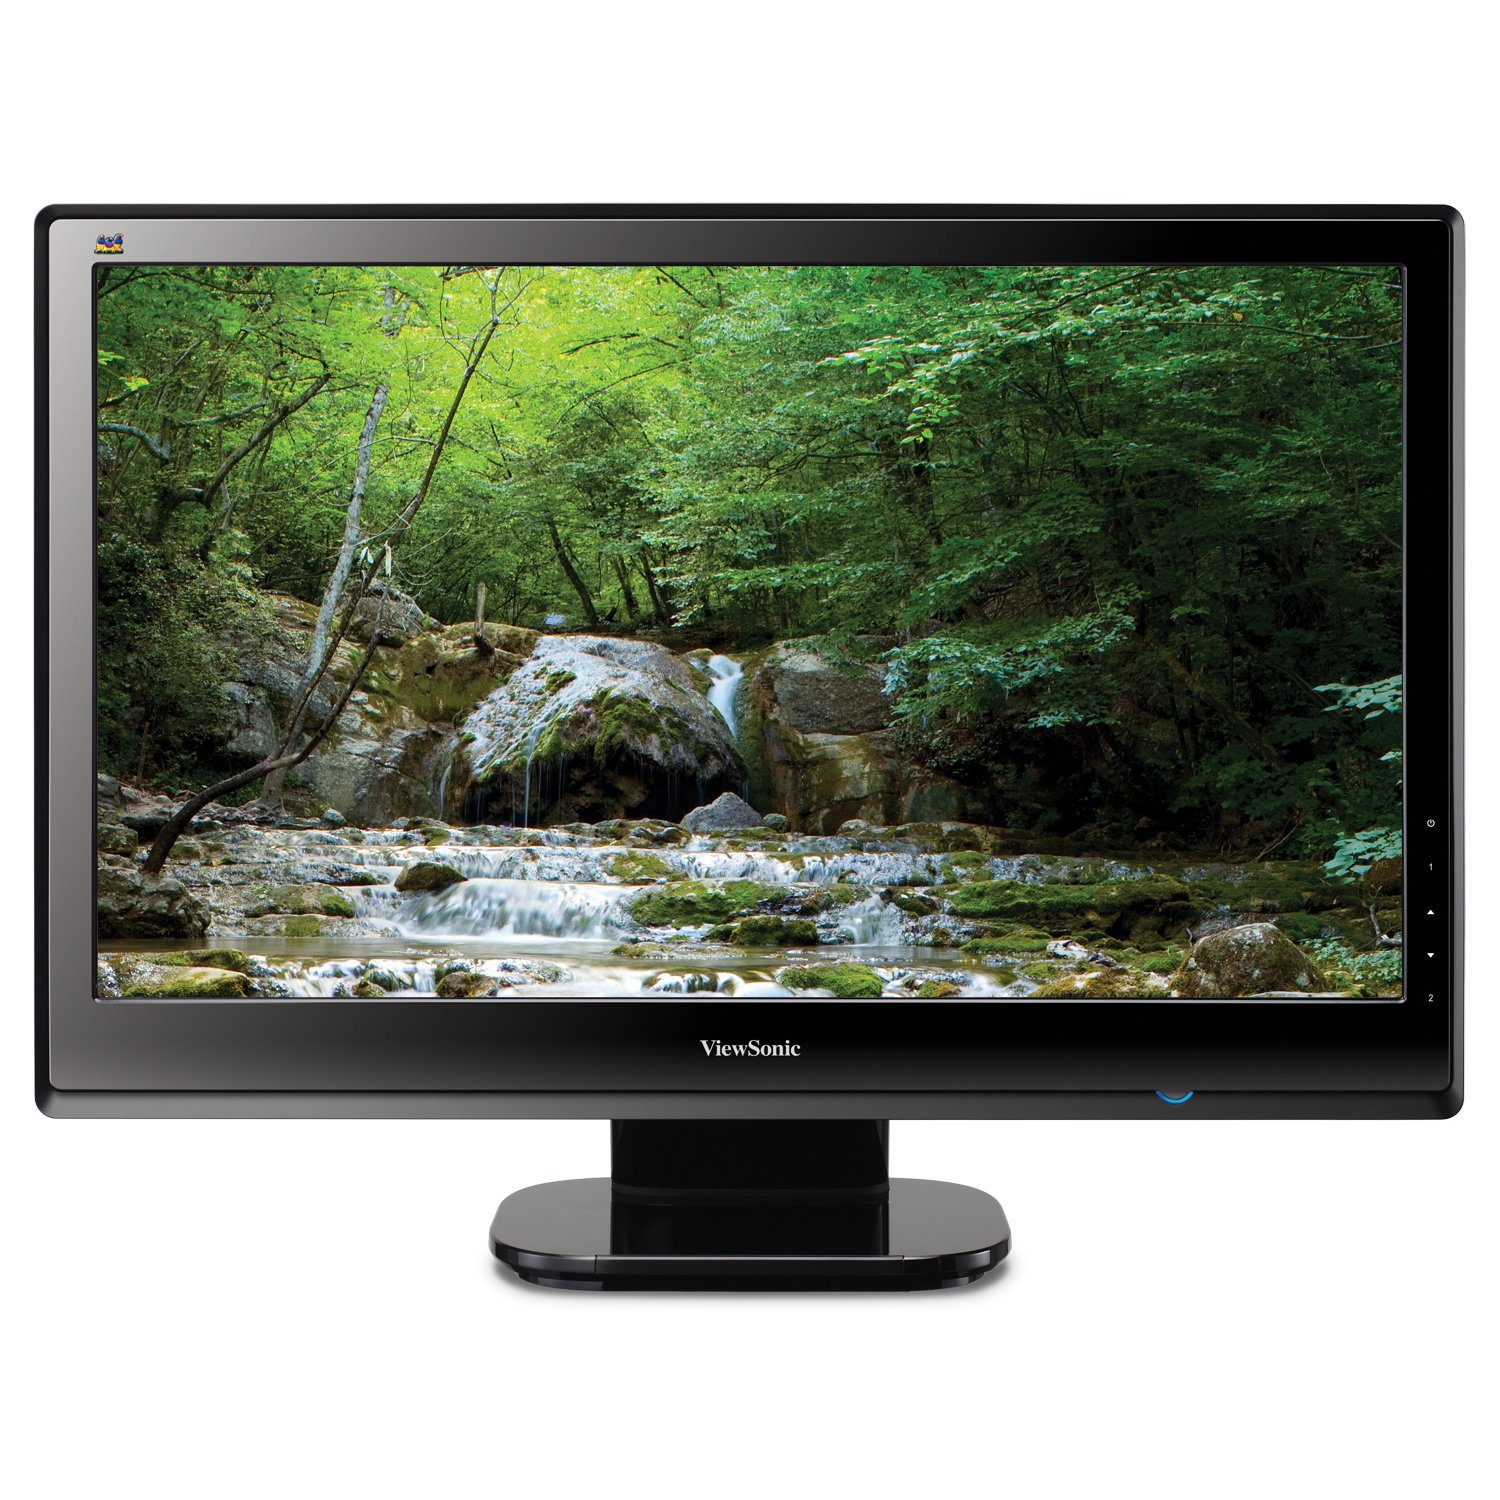 http://thetechjournal.com/wp-content/uploads/images/1204/1334019613-viewsonic-vx2453mhled-24inch-ultrathin-widescreen-led-monitor--1.jpg